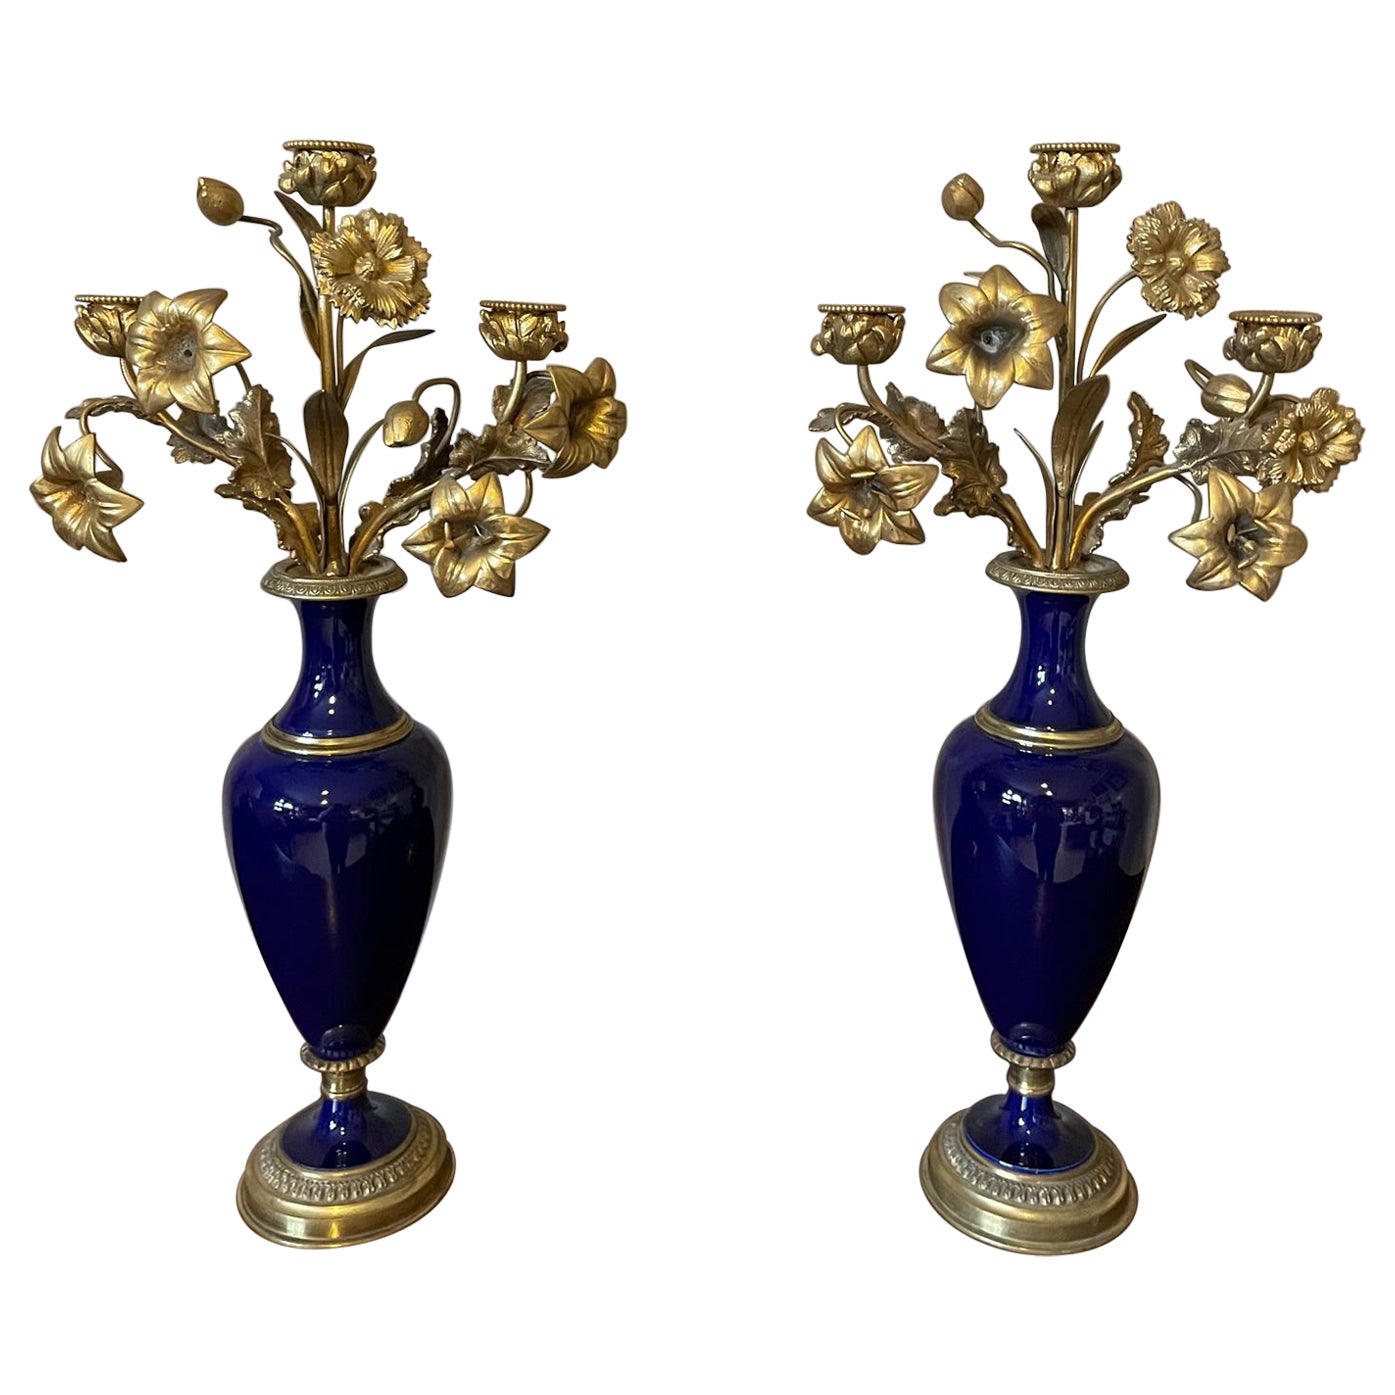 19th Century French Pair of Bronze and Blue Sevres Porcelain Candelabras